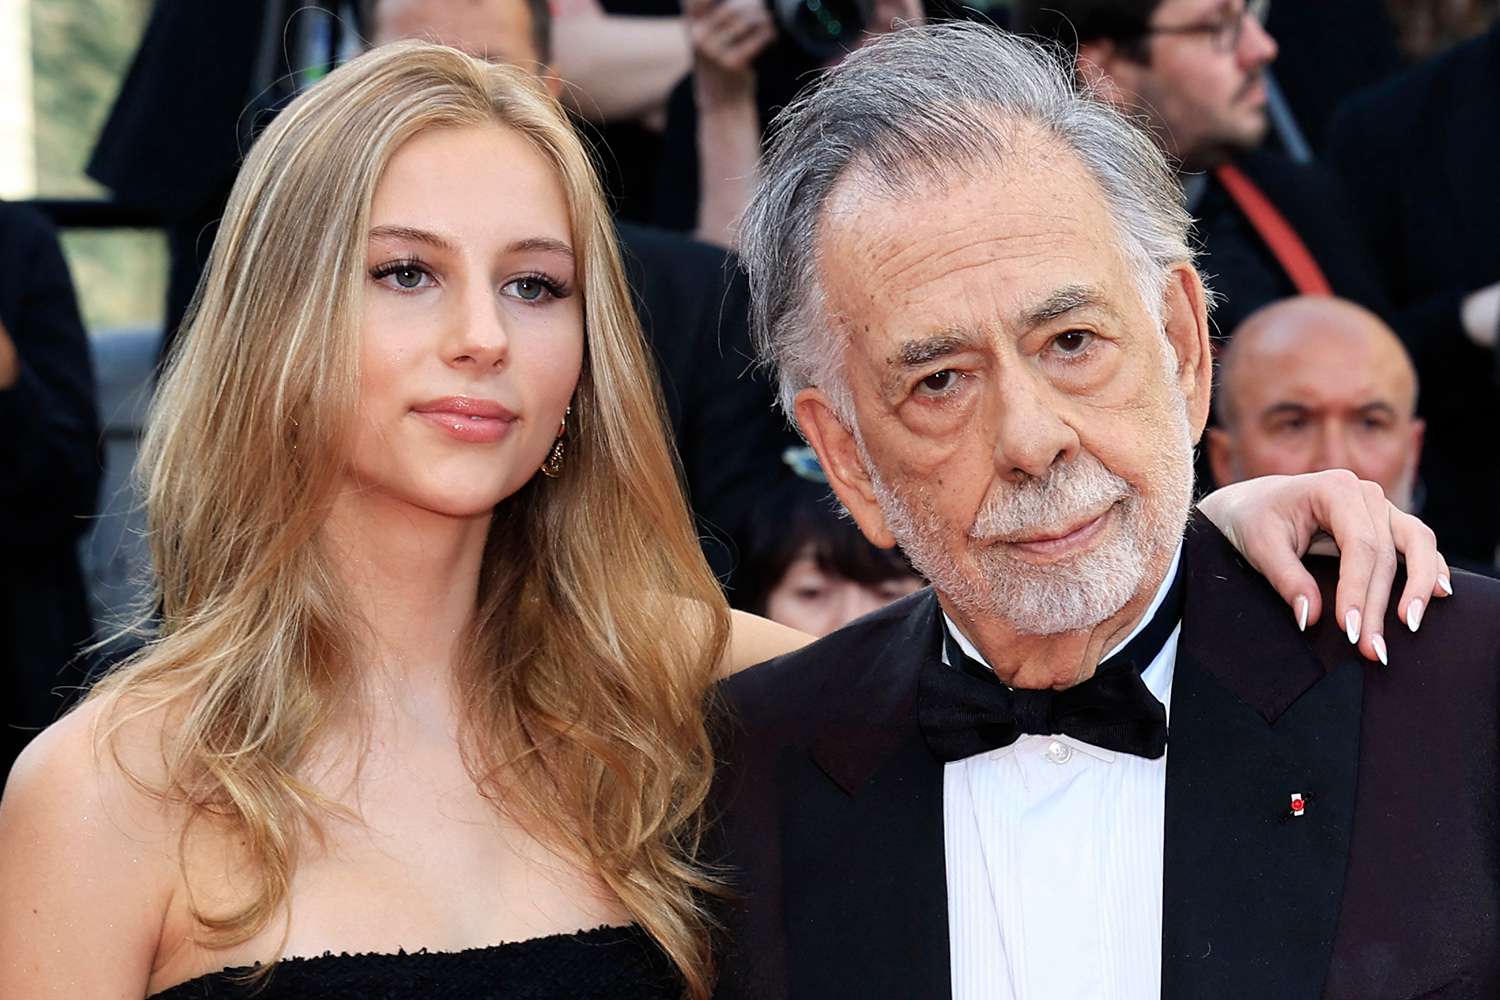 Francis Ford Coppola Brings His Granddaughter Romy, 17, to Cannes Premiere of “Megalopolis”